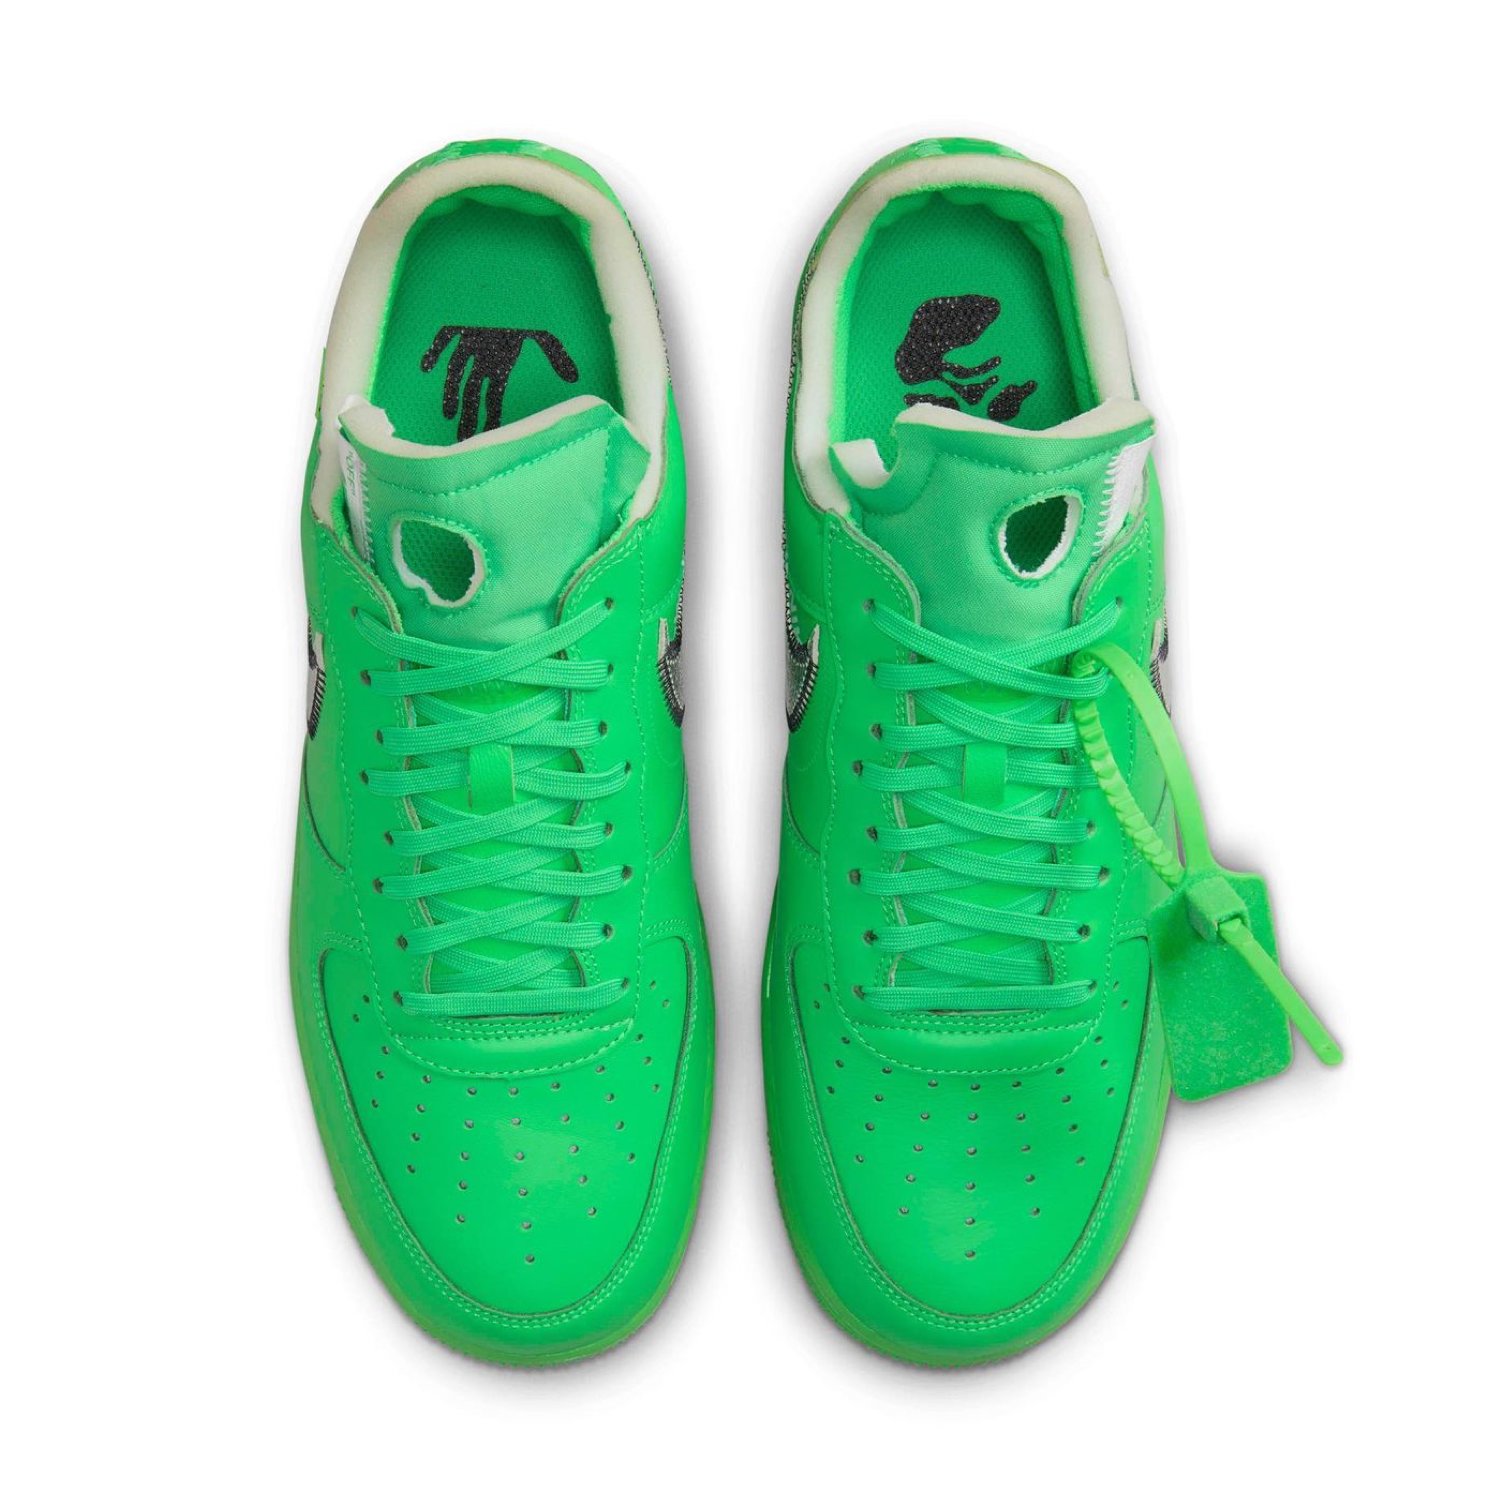 off-white-nike-air-force-1-sp-light-green-spark-brooklyn-museum-3a.jpeg